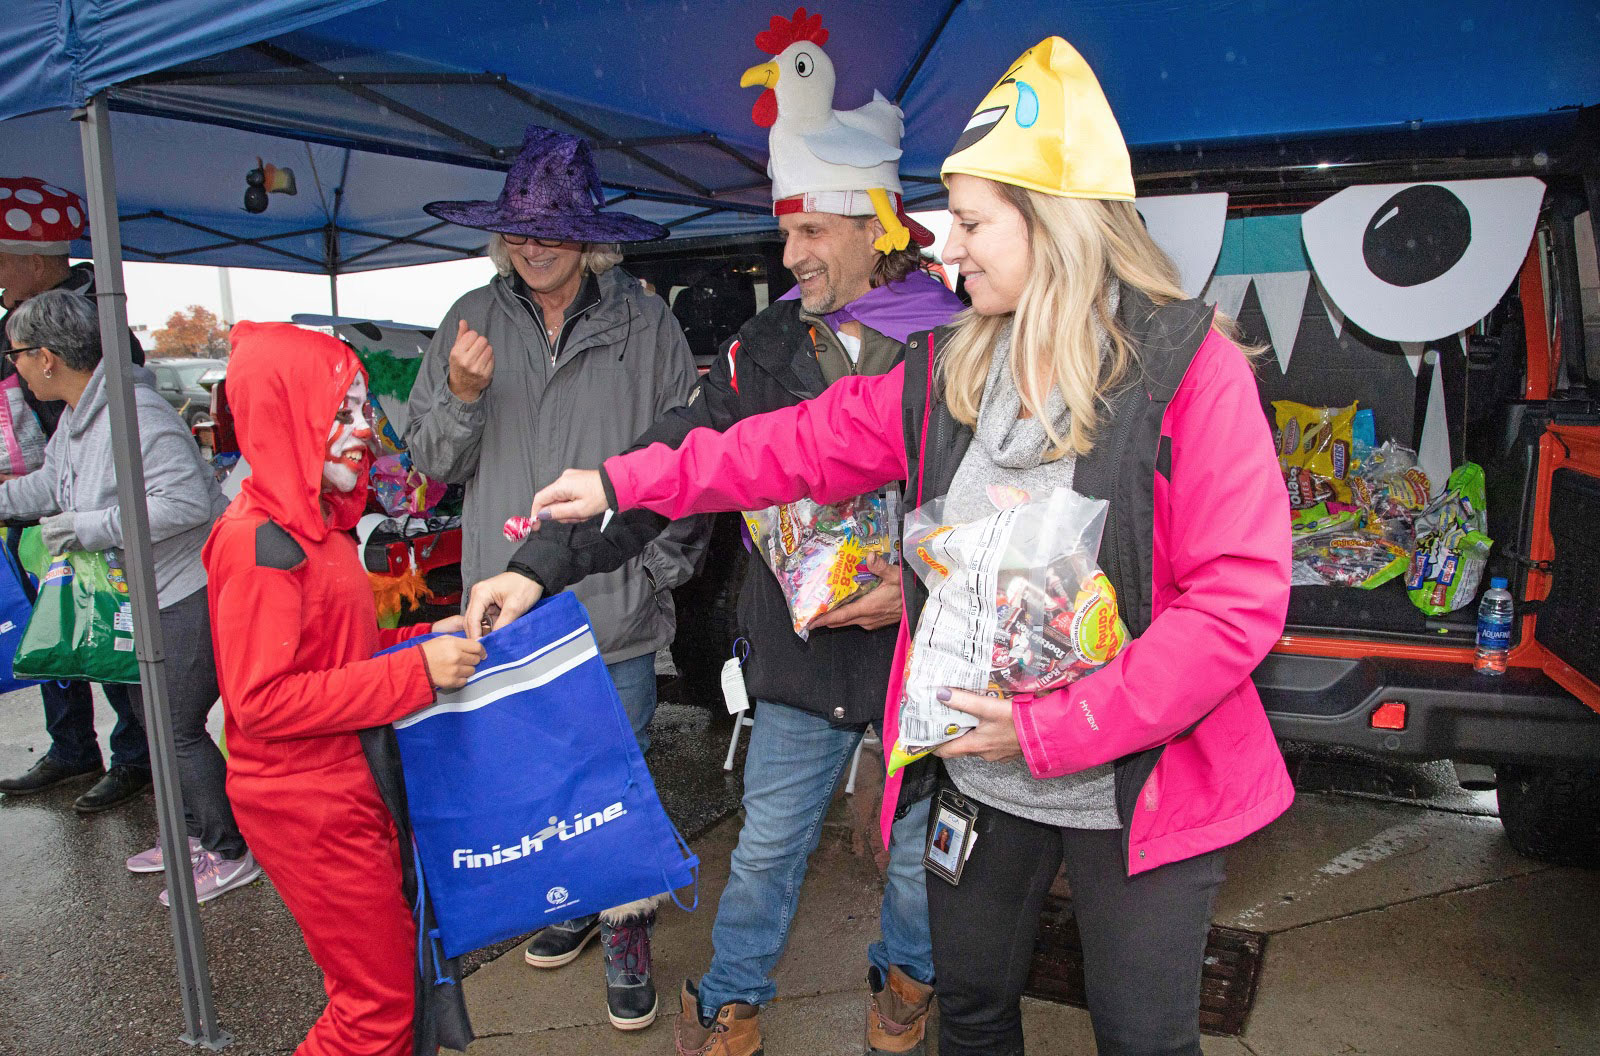 Denise Debouvre (left), Manager–HR Communications Lead, and Laurie Vitale (right), Head of Internal Audit and Compliance, FCA–North America, help hand out candy to the kids.